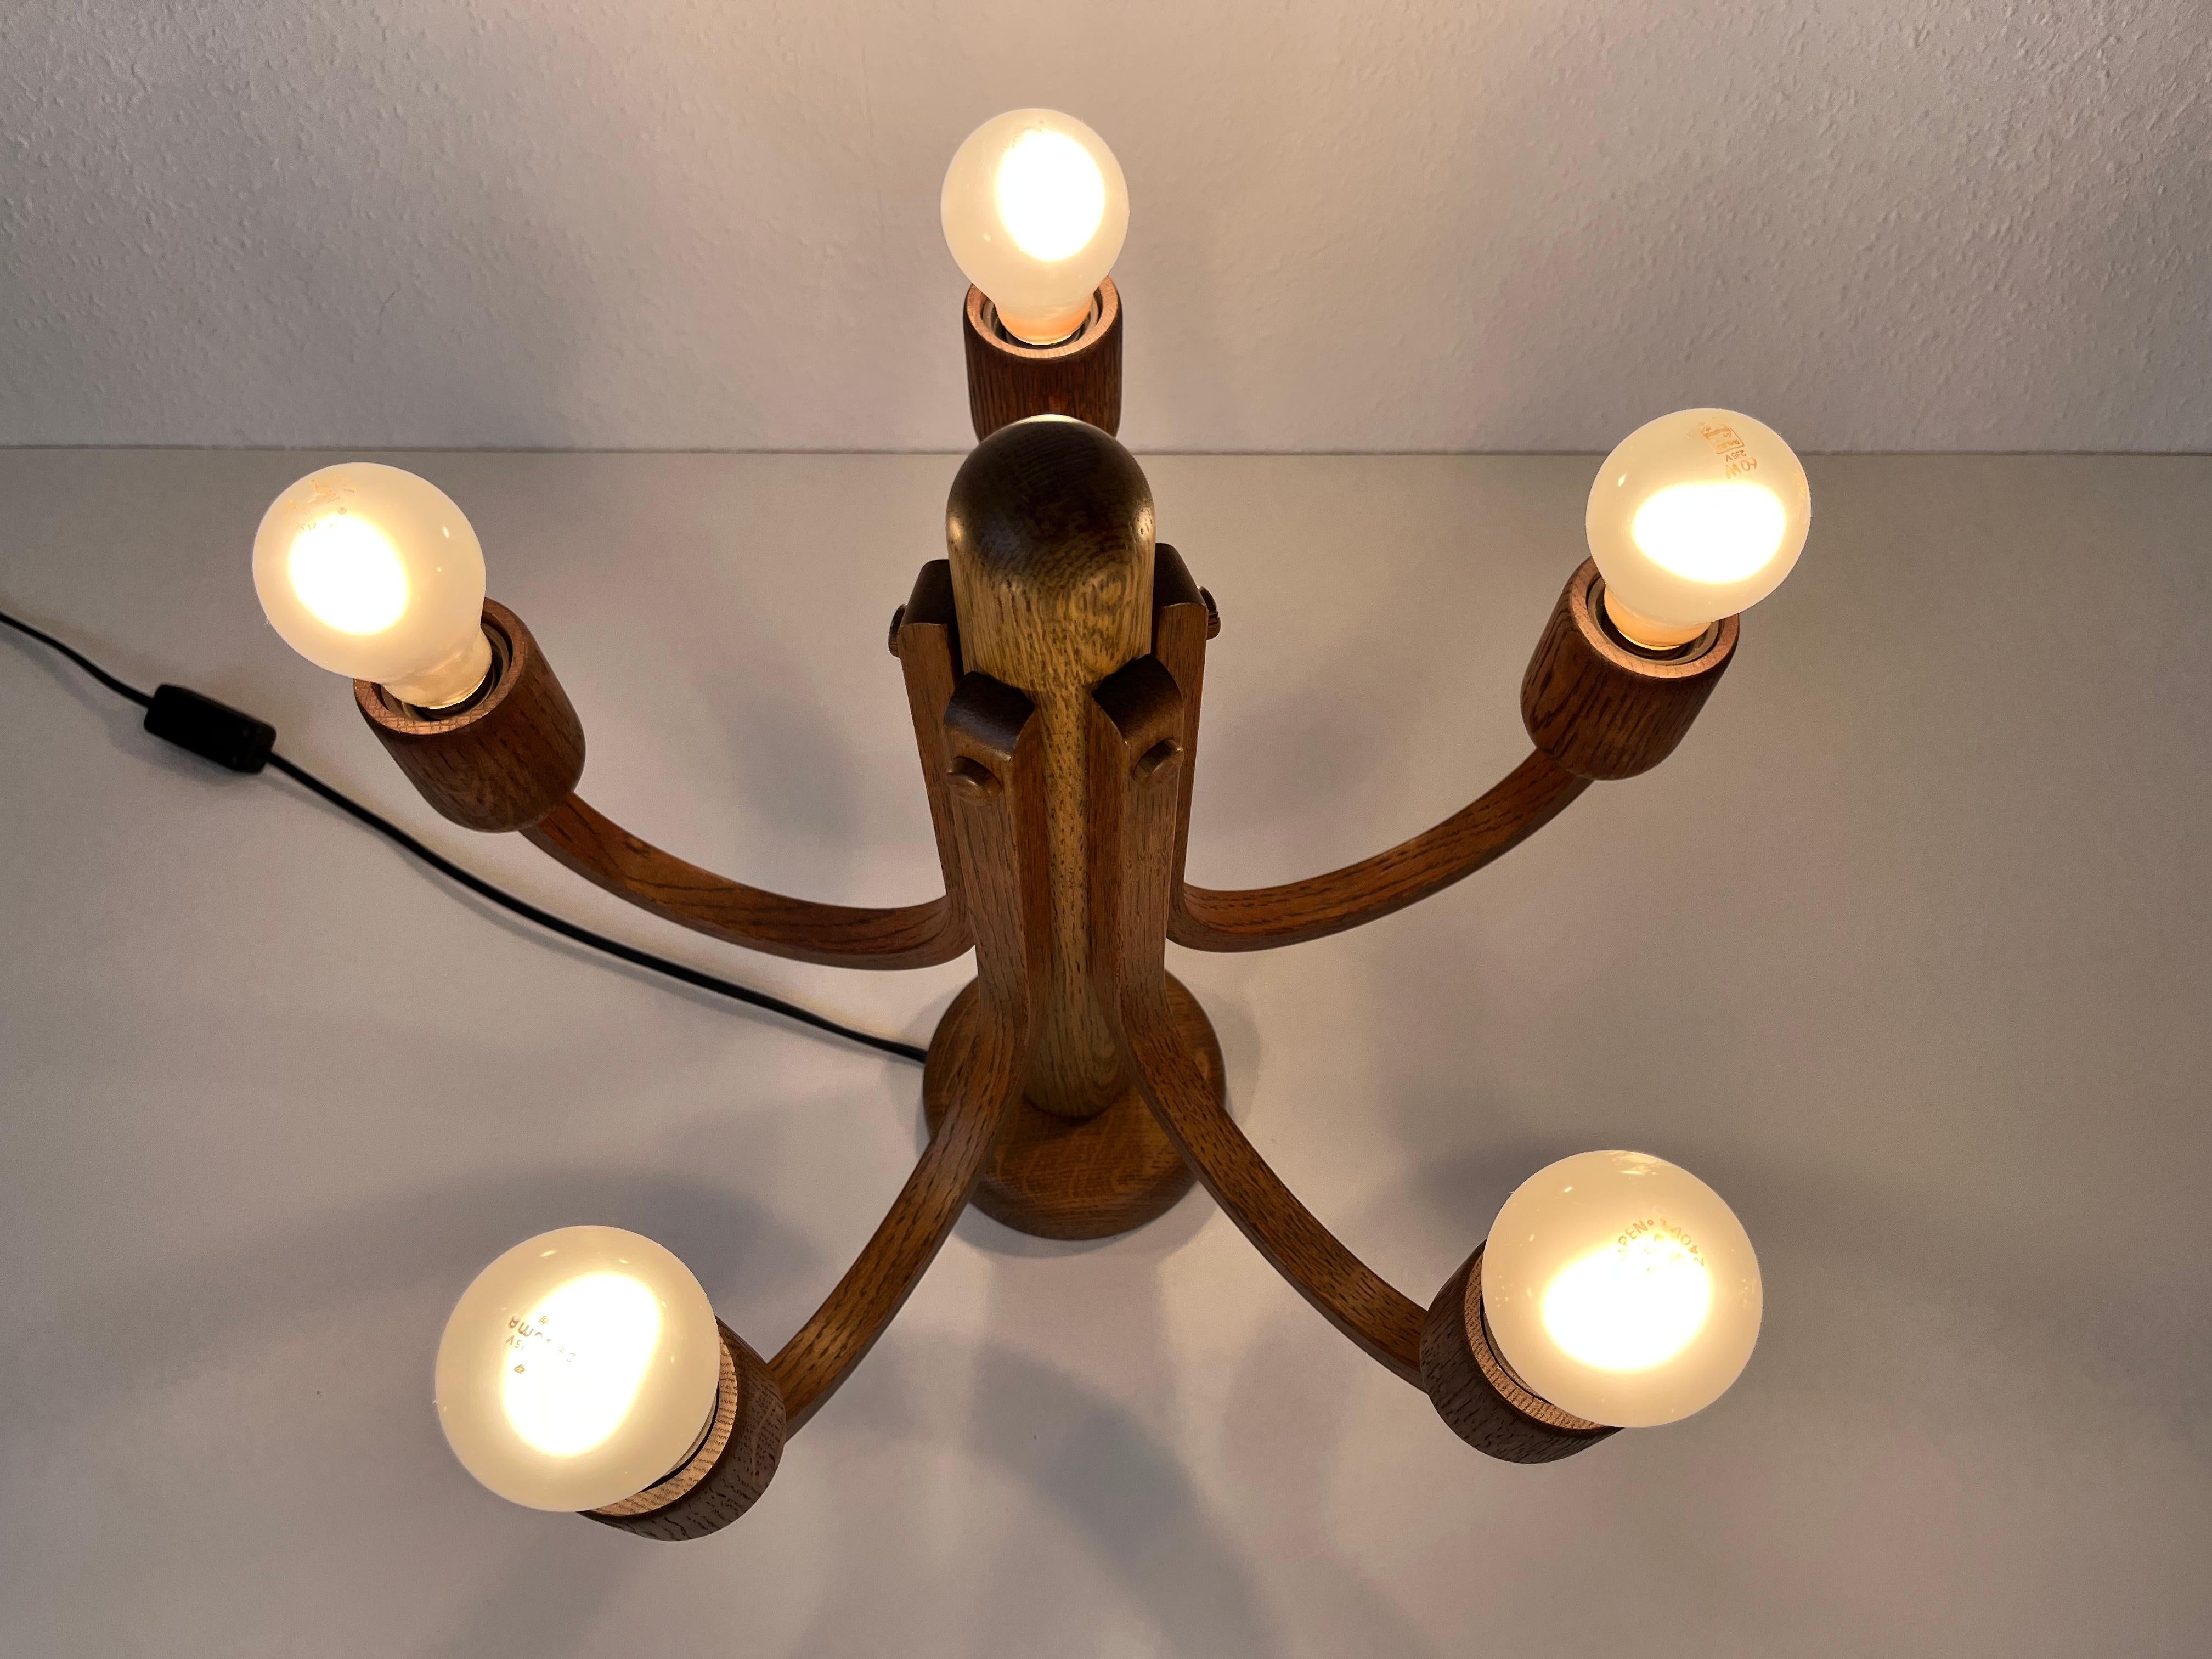 Midcentury Wooden Pendant Lamp with 5 Arms by Domus, 1960s For Sale 4